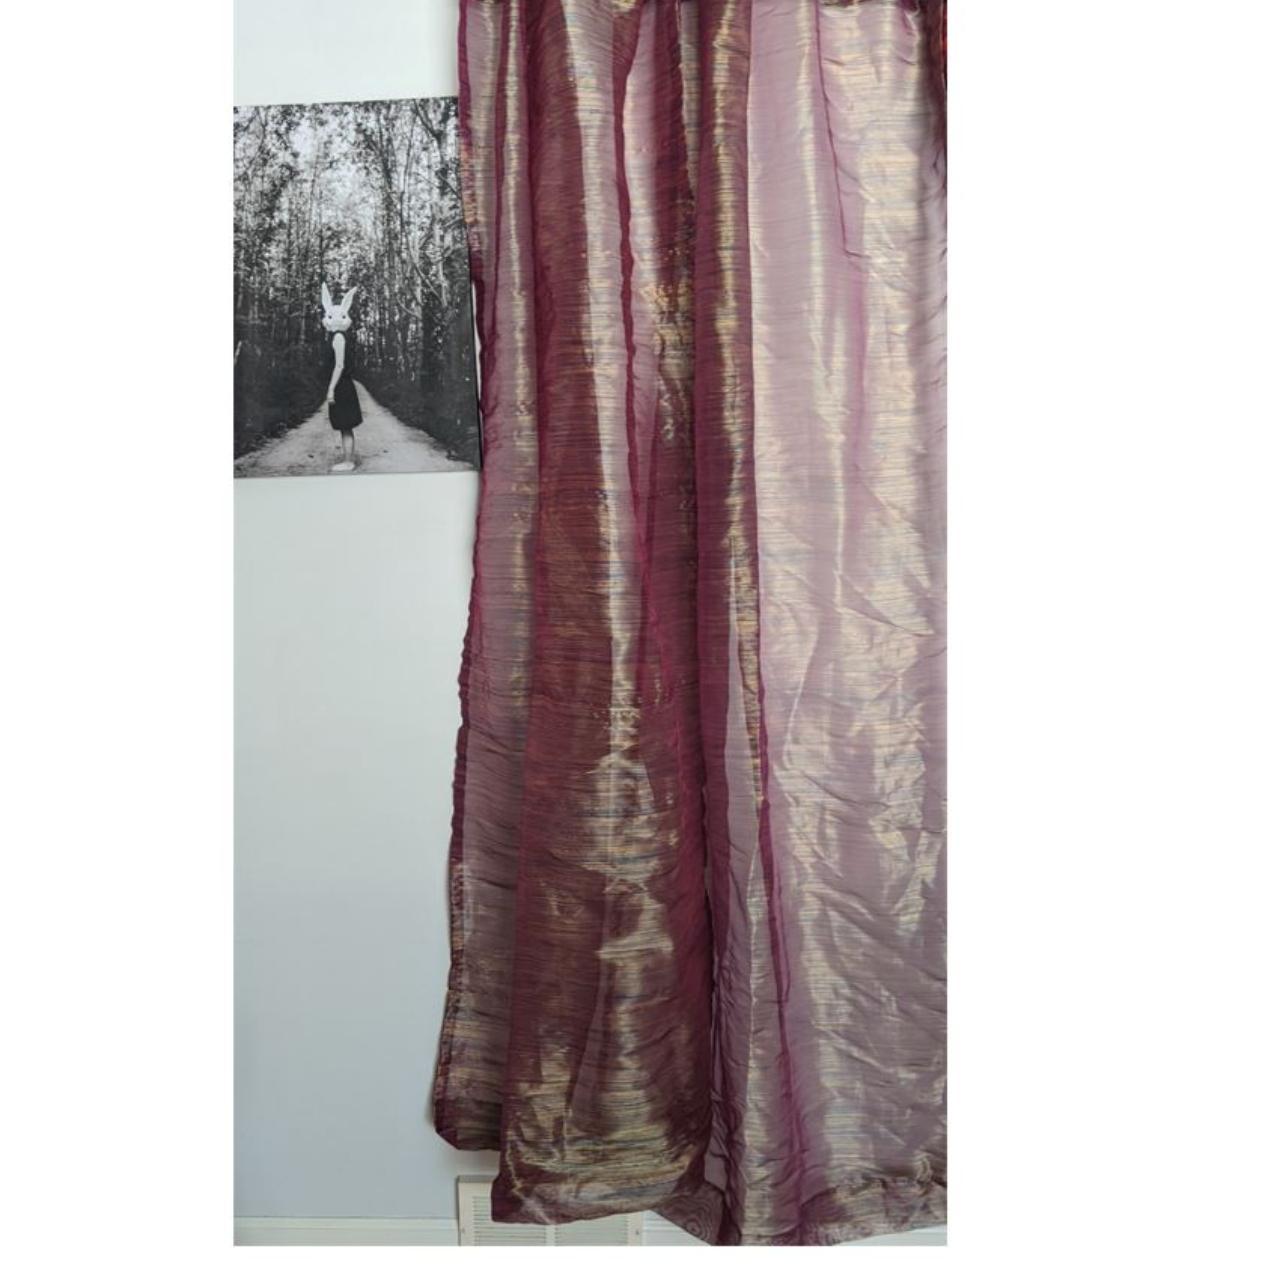 Product Image 2 - Bright striped curtain sheers

2 Panels.